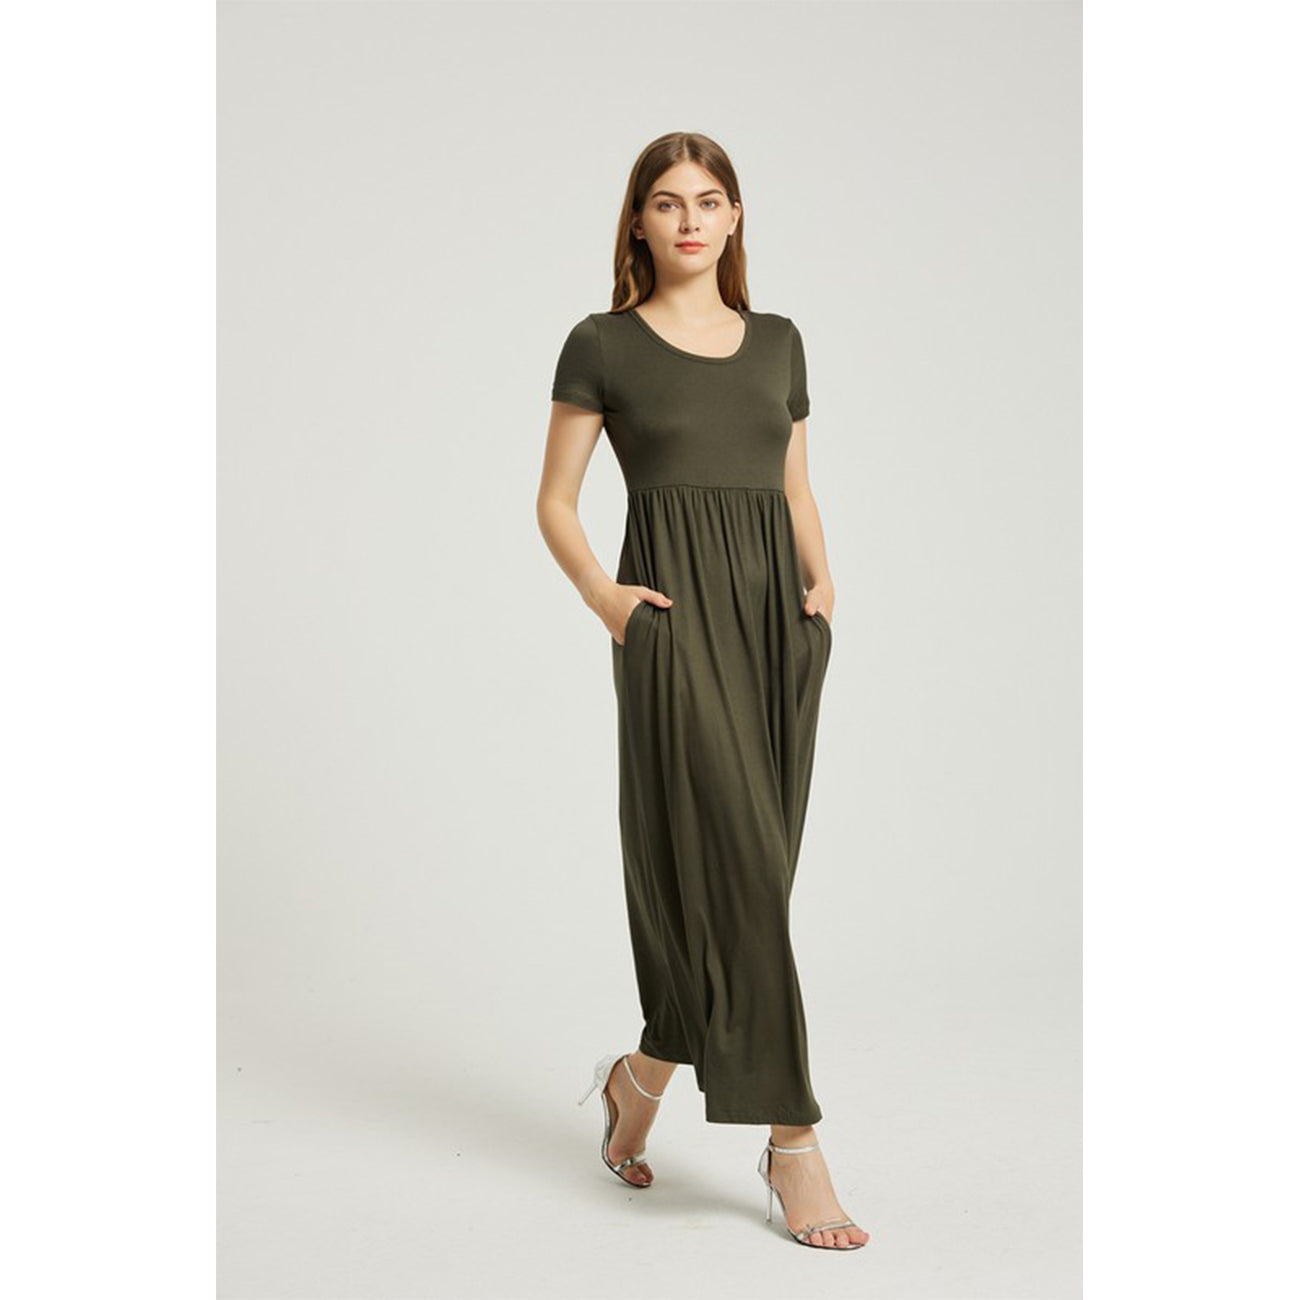 Women's Summer Casual Maxi Dress With Pocket- Olive